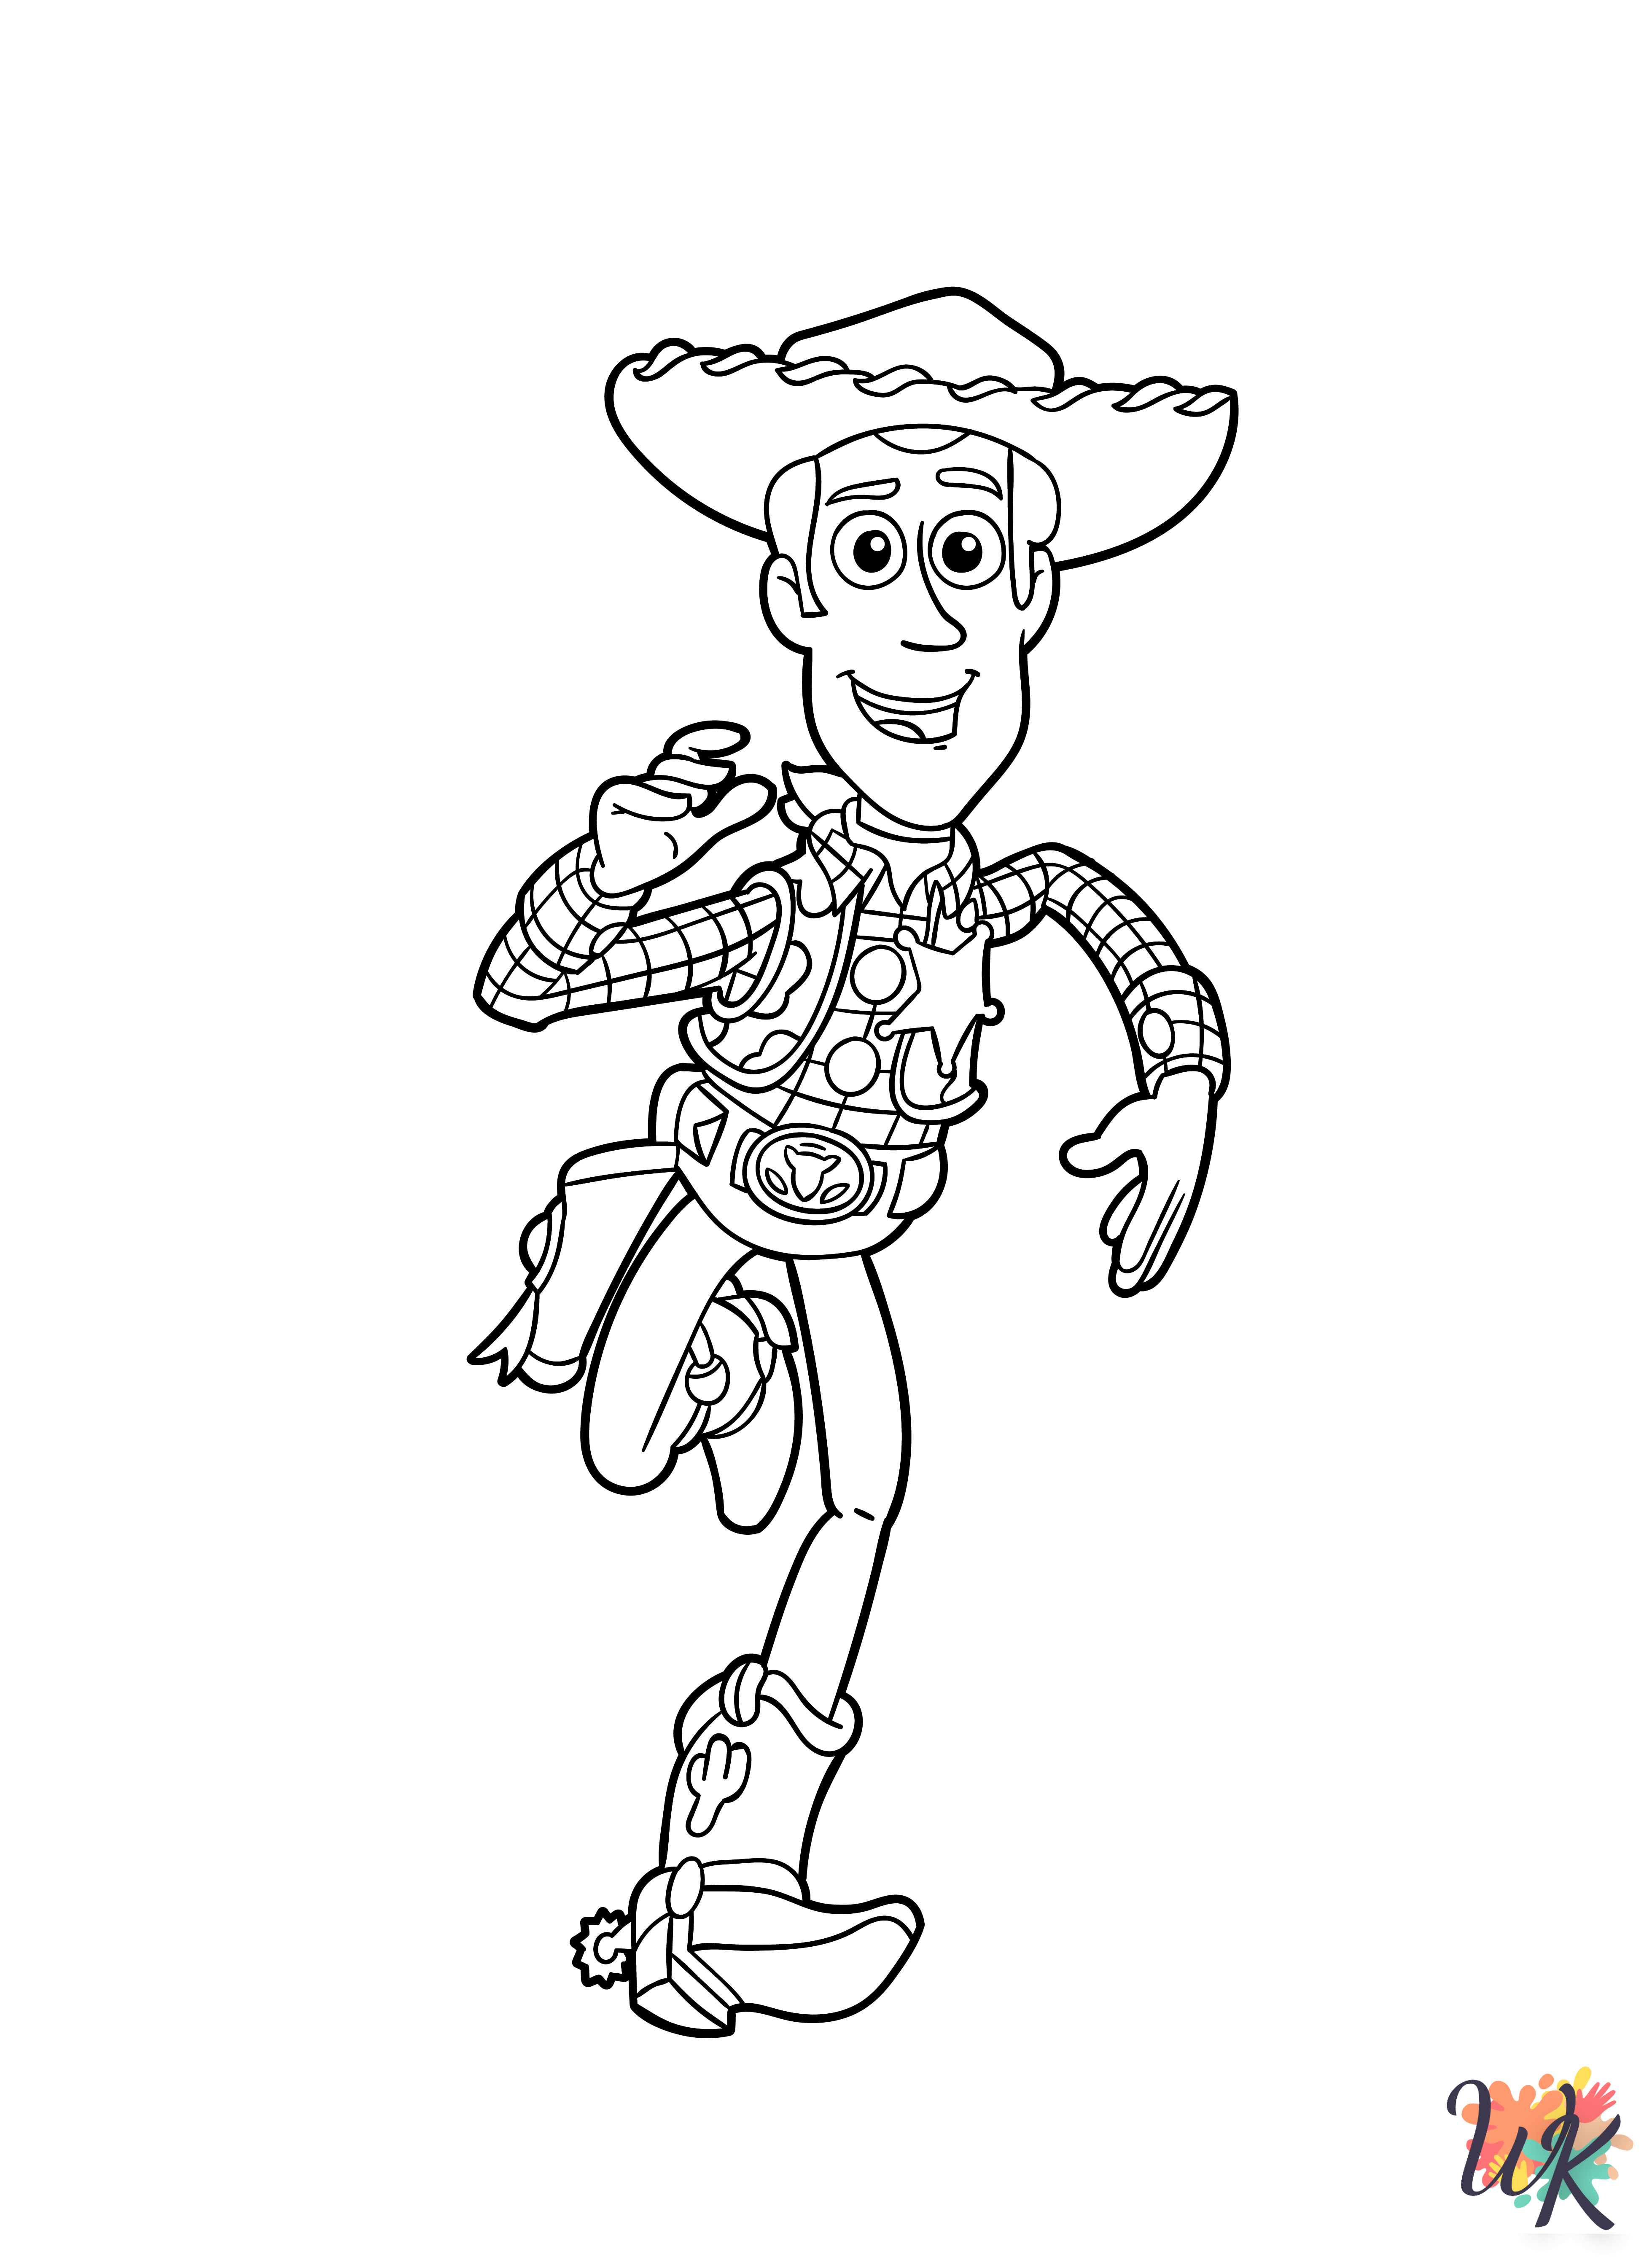 fun Toy Story coloring pages